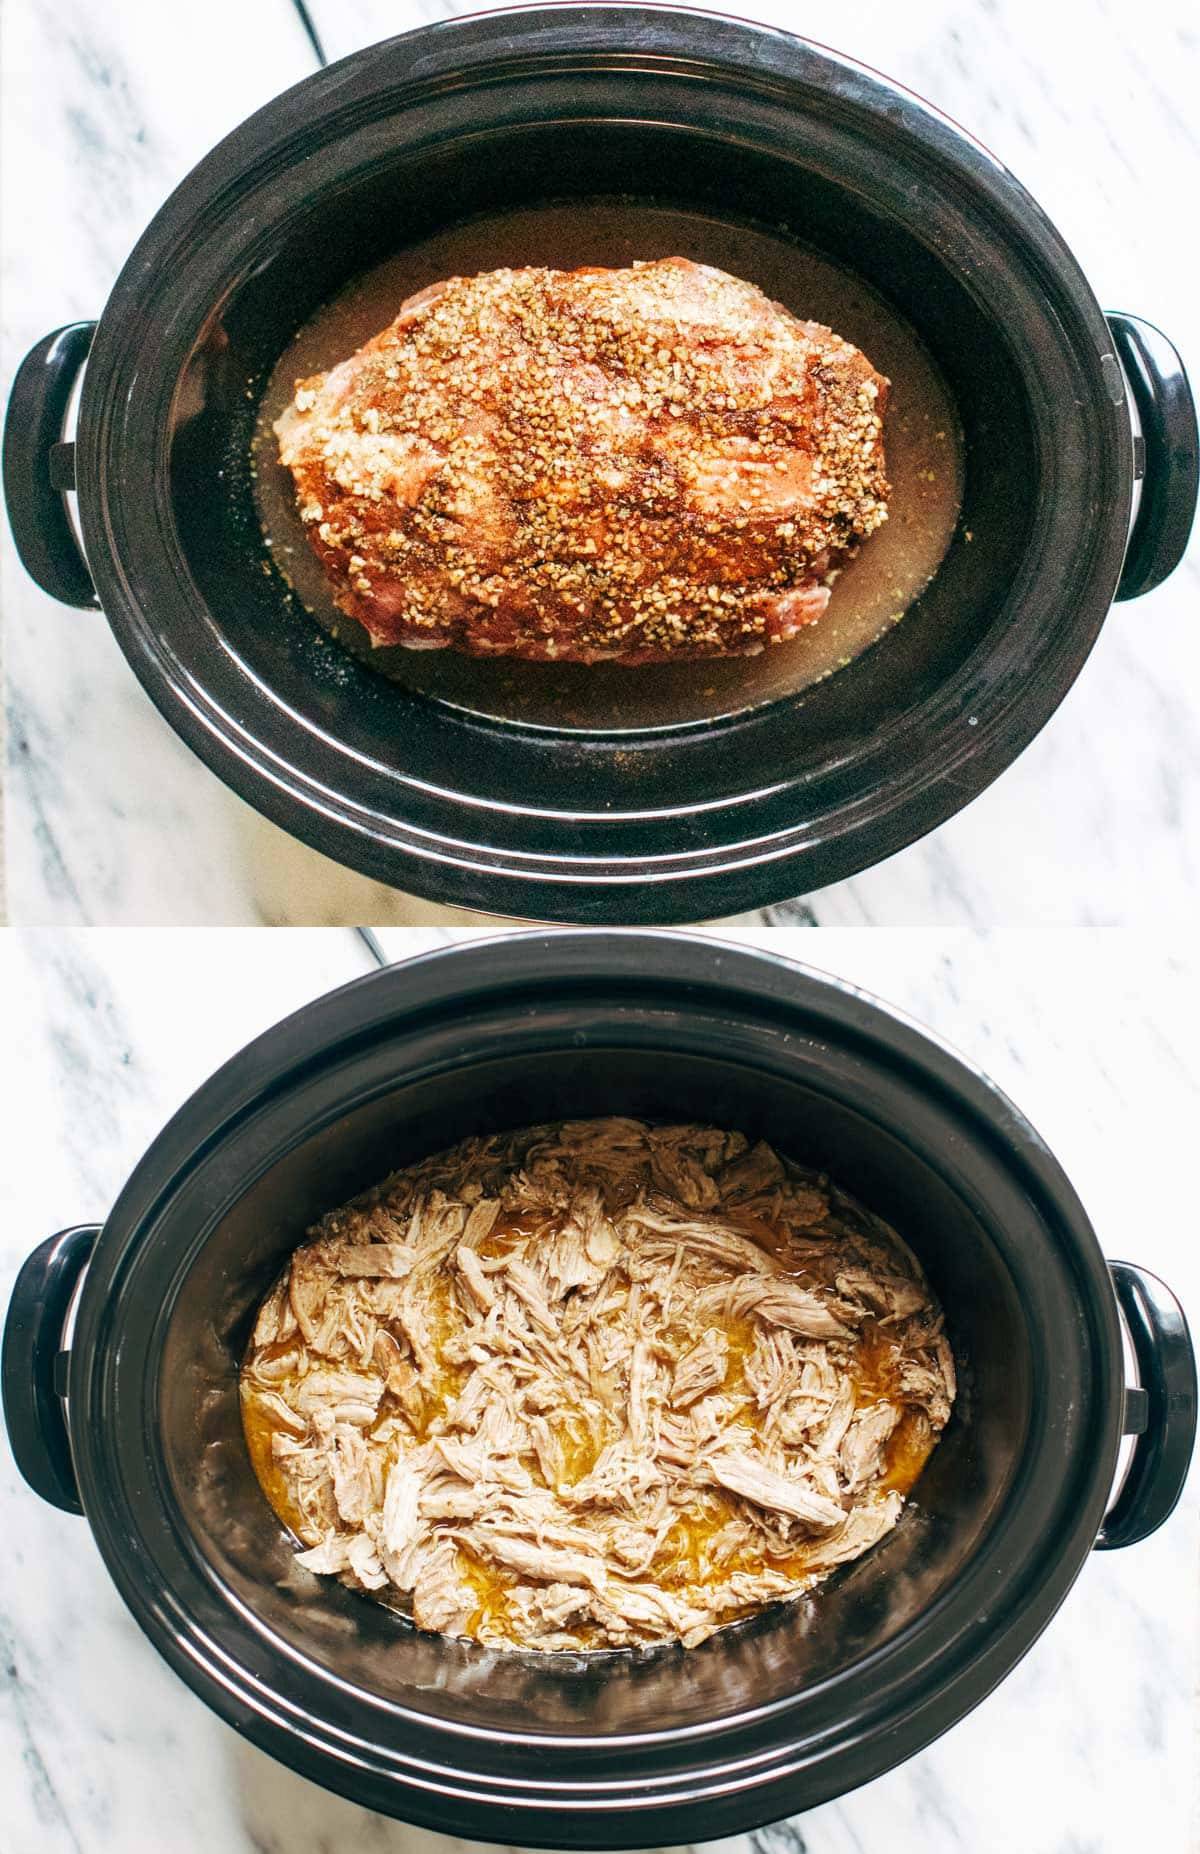 12 SUPER easy recipes you can make in a slow cooker, from vegetarian lasagna to a whole roast chicken and roasted in a pot! | pinchofyum.com